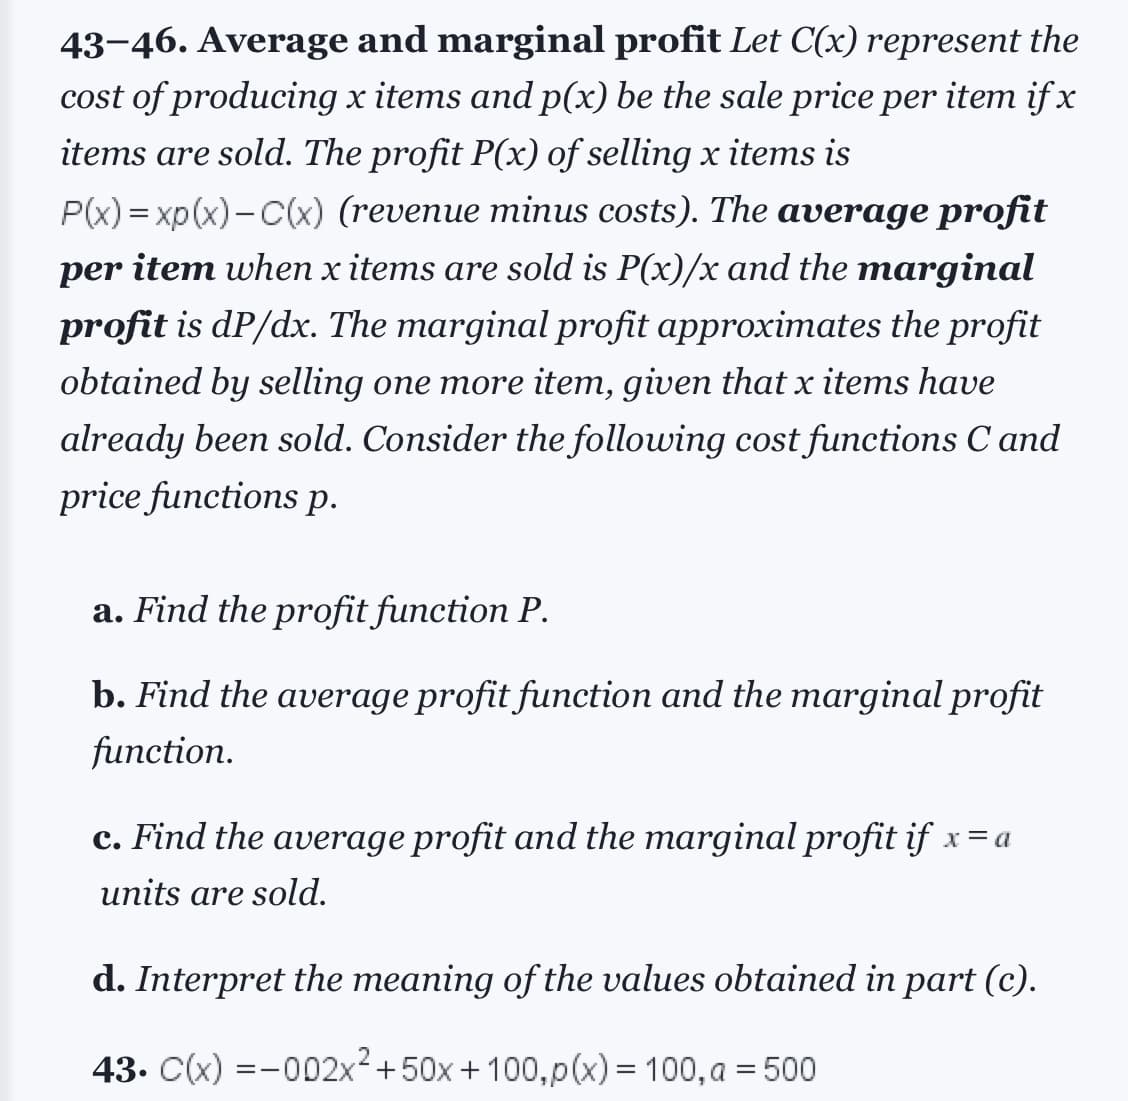 43-46. Average and marginal profit Let C(x) represent the
cost of producing x items and p(x) be the sale price per item if x
items are sold. The profit P(x) of selling x items is
P(x)=xp(x)-C(x) (revenue minus costs). The average profit
per item when x items are sold is P(x)/x and the marginal
profit is dp/dx. The marginal profit approximates the profit
obtained by selling one more item, given that x items have
already been sold. Consider the following cost functions C and
price functions p.
a. Find the profit function P.
b. Find the average profit function and the marginal profit
function.
c. Find the average profit and the marginal profit if x = a
units are sold.
d. Interpret the meaning of the values obtained in part (c).
43. C(x) =-002x² +50x+100, p(x) = 100, a = 500